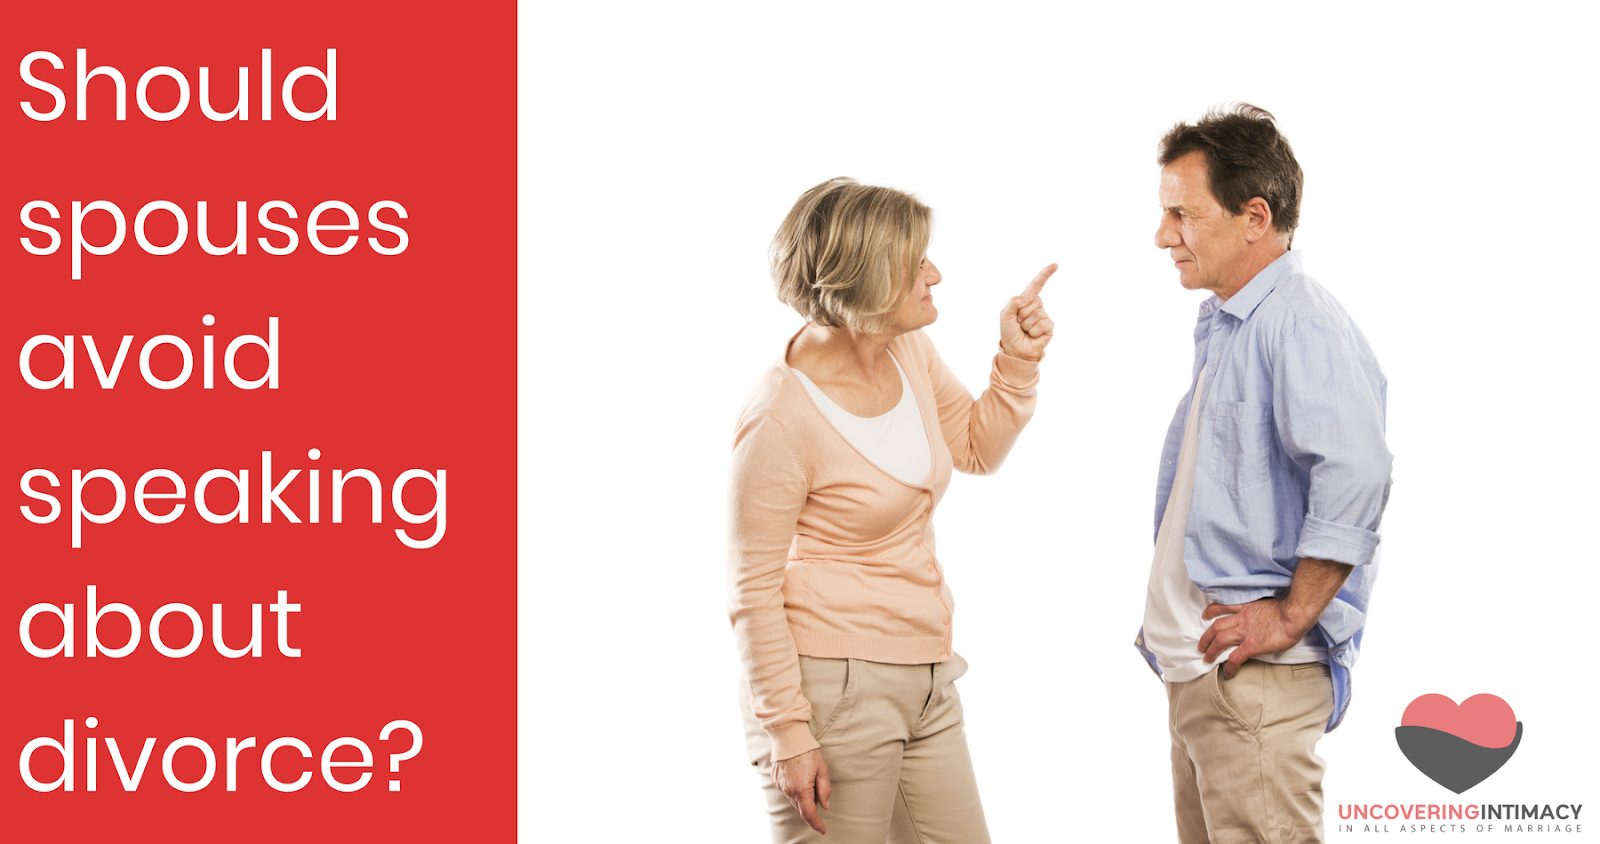 Should spouses avoid speaking about divorce?